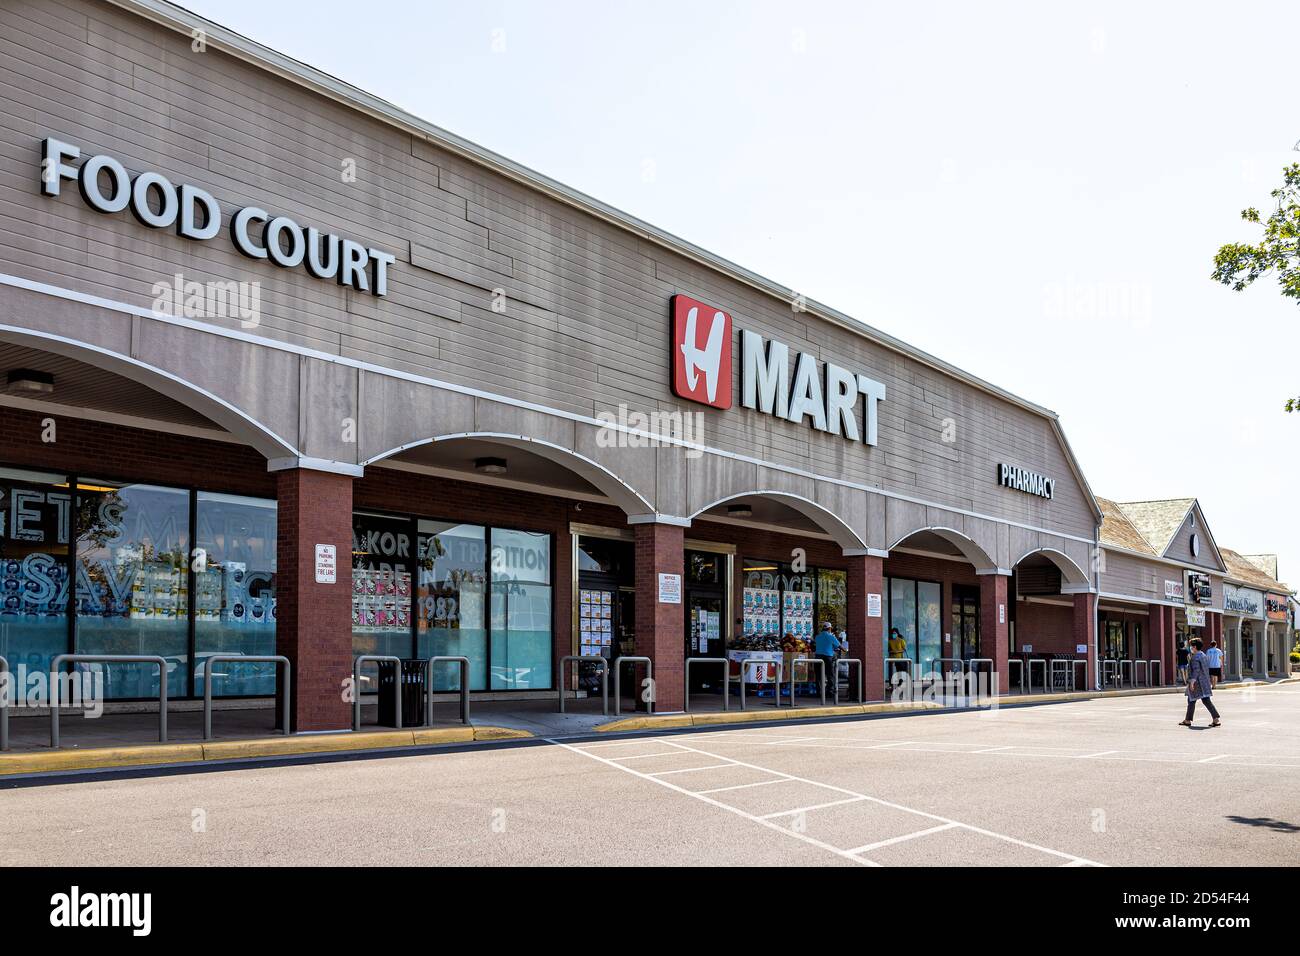 Centreville, USA - September 7, 2020: Hmart asian grocery store facade with Korean people walking entering shop with sign for food court during covid Stock Photo